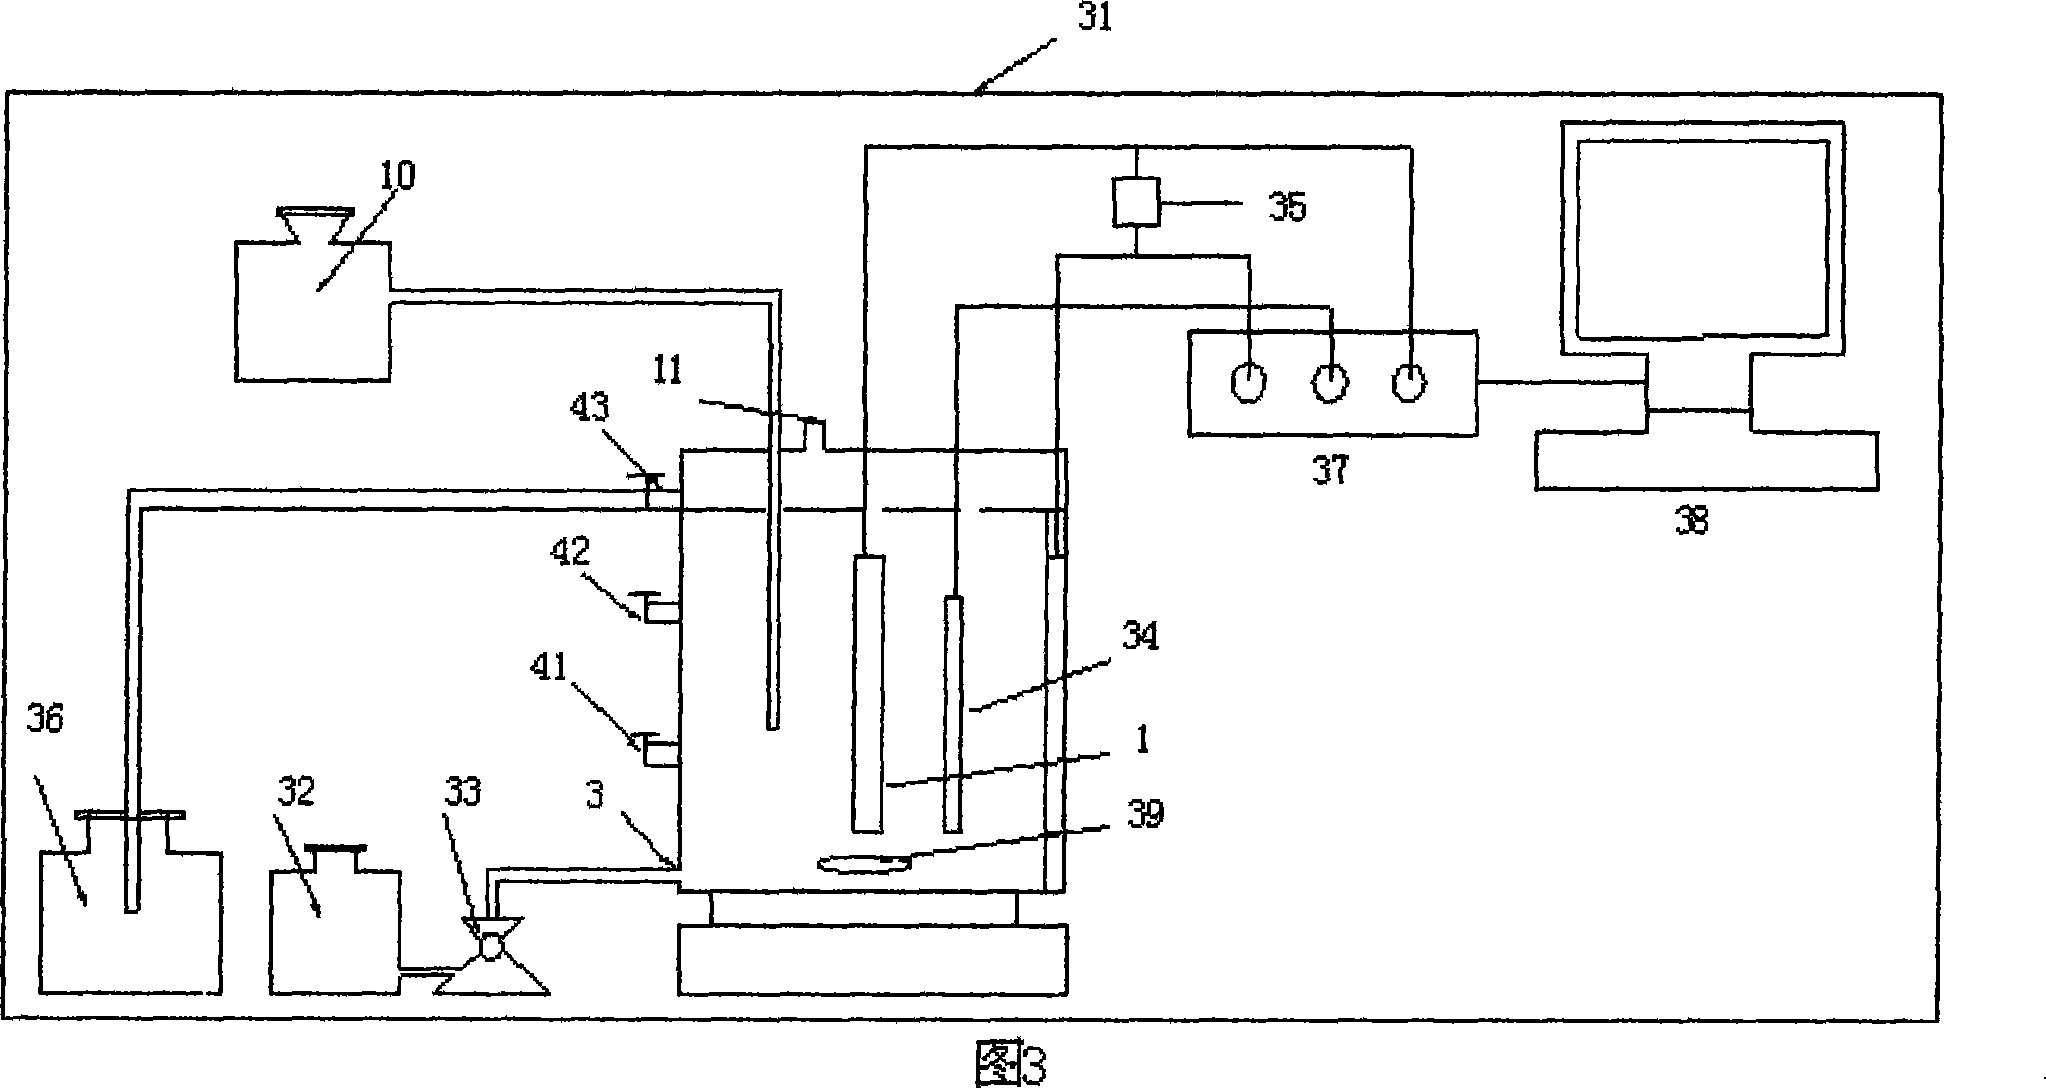 Self-medium coupled microbe fuel battery for single room micro filtering